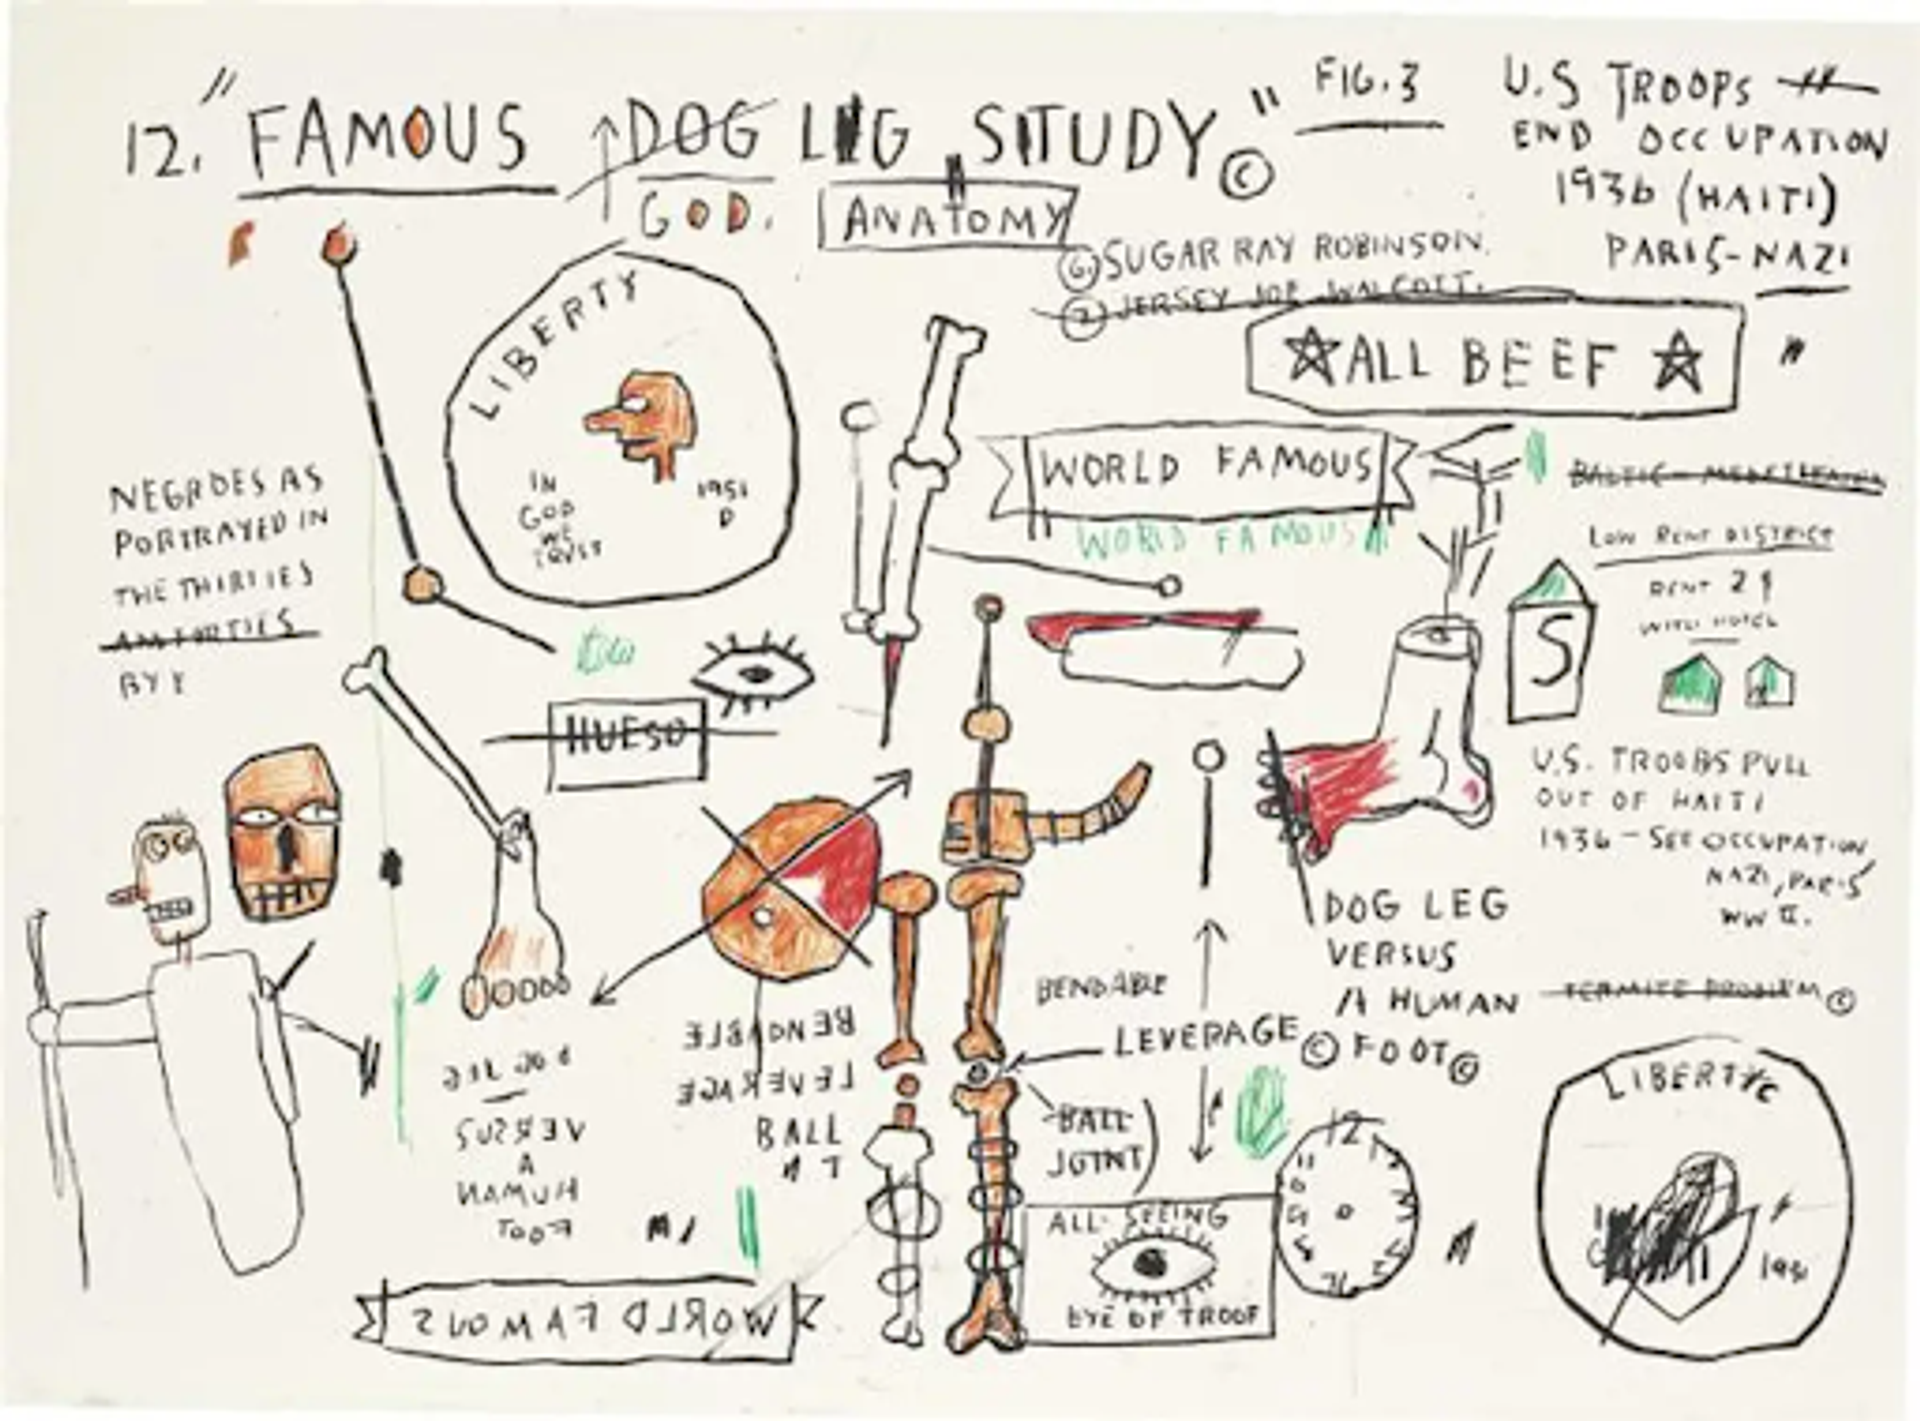 Jean-Michel Basquiat’s Dog Leg Study. A Neo Expressionist screenprint of various texts including "Famous Dog Leg Study" combined with anatomical figures and characters against a white background. 